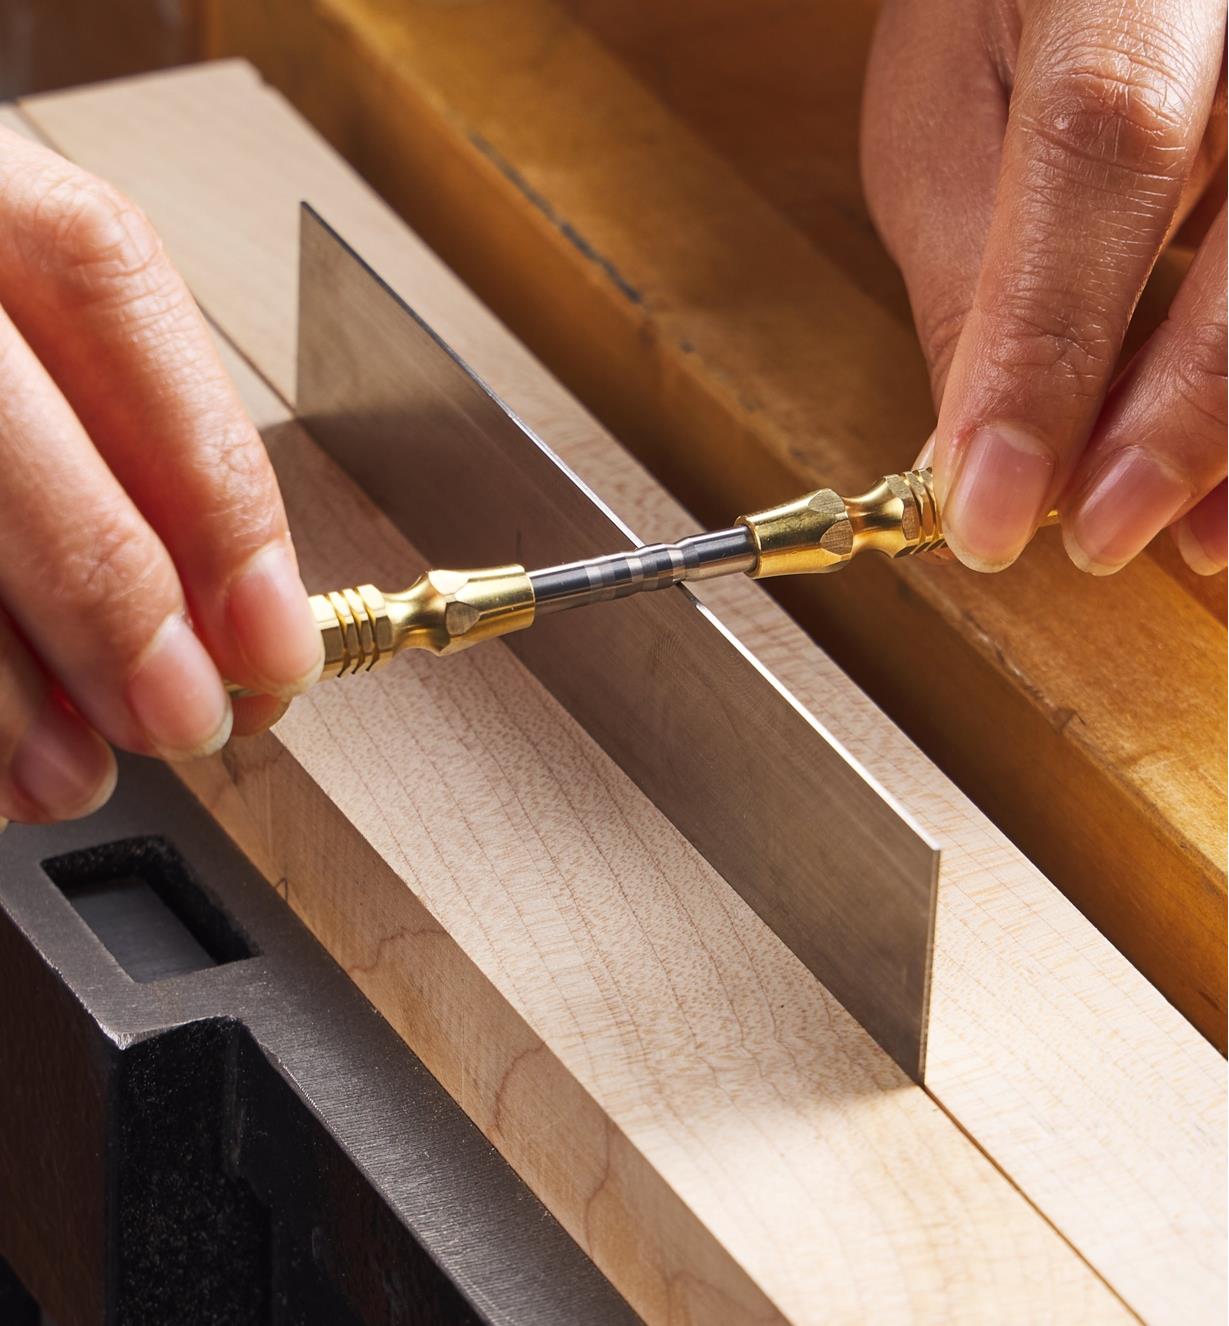 Using an Accu-Burr handled burnisher to roll 15° hooks on the edge of a scraper held in a vise